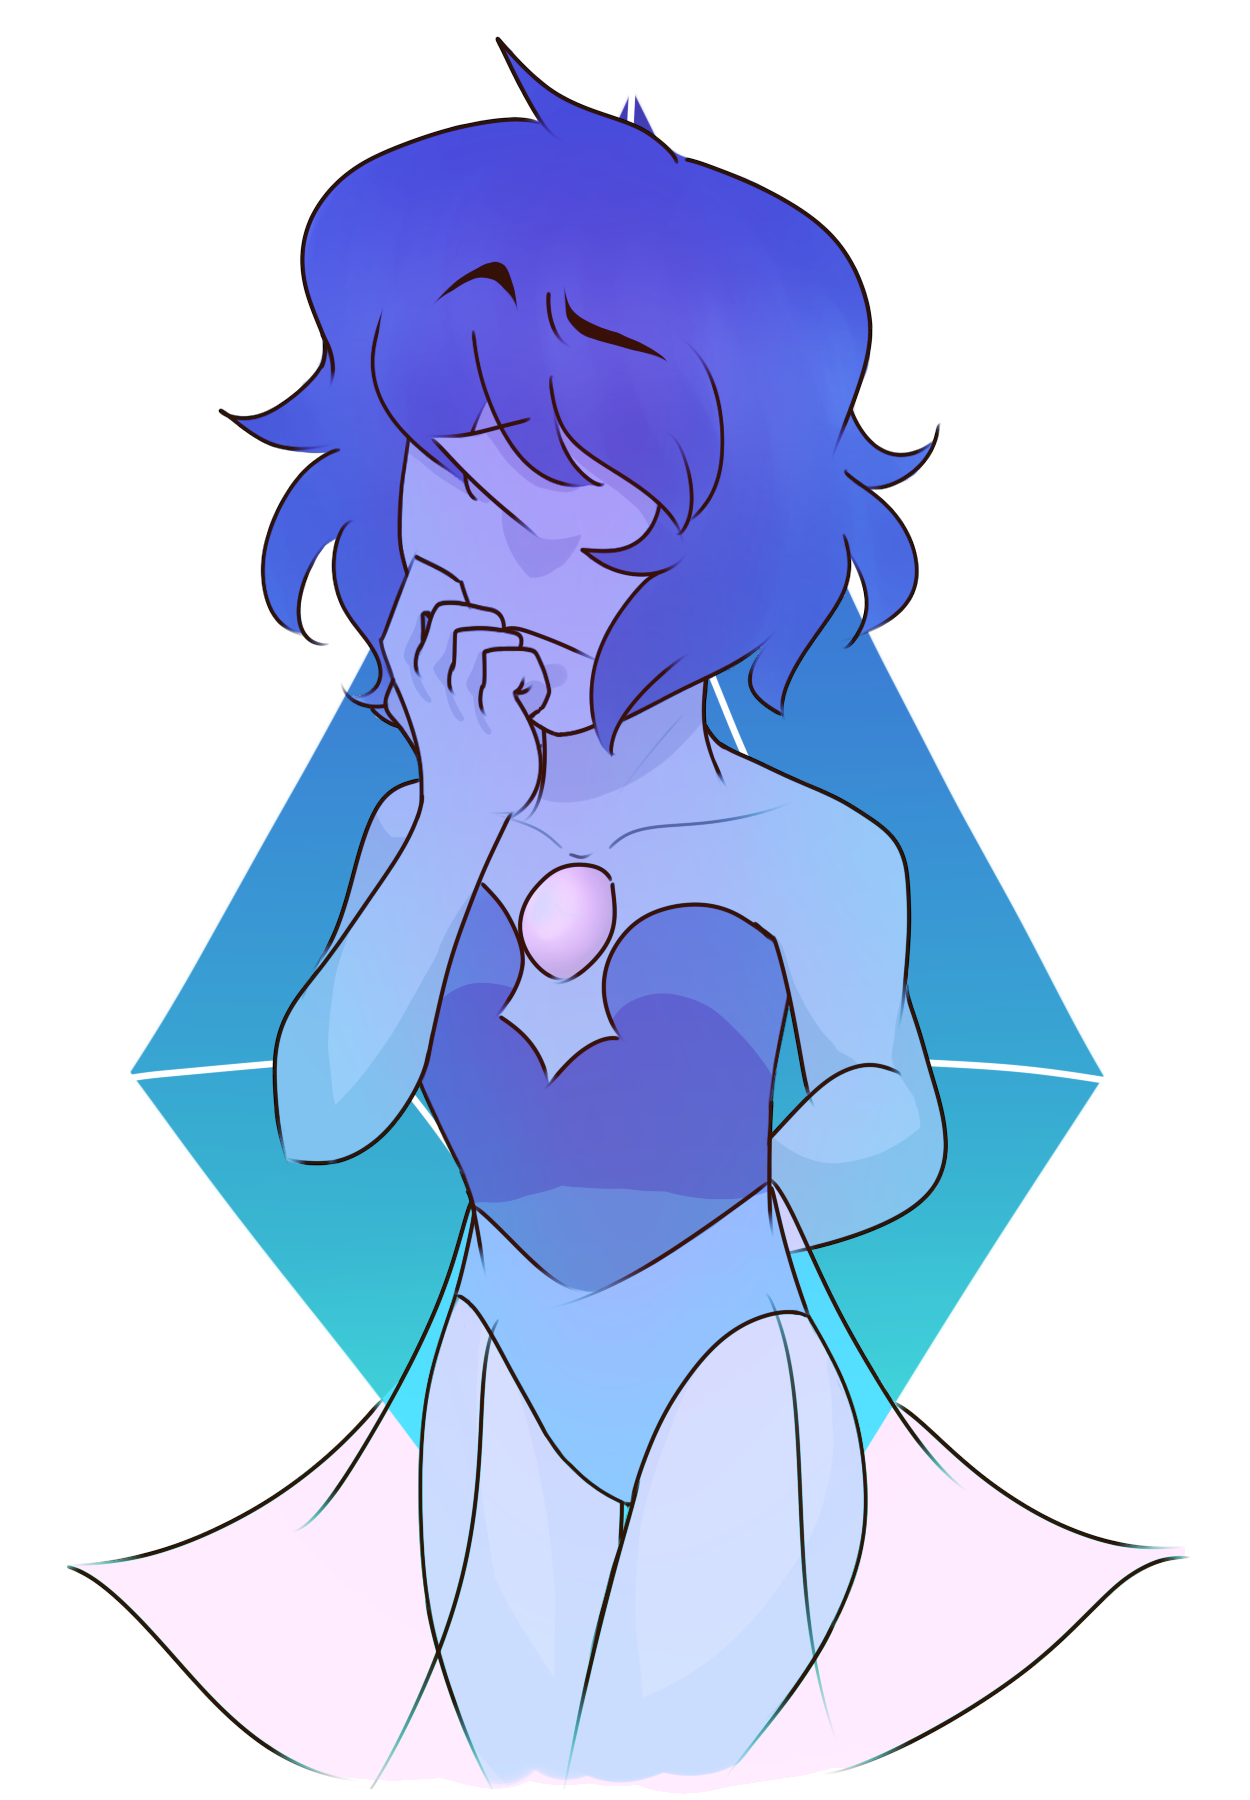 A redraw of a blue pearl I did back then